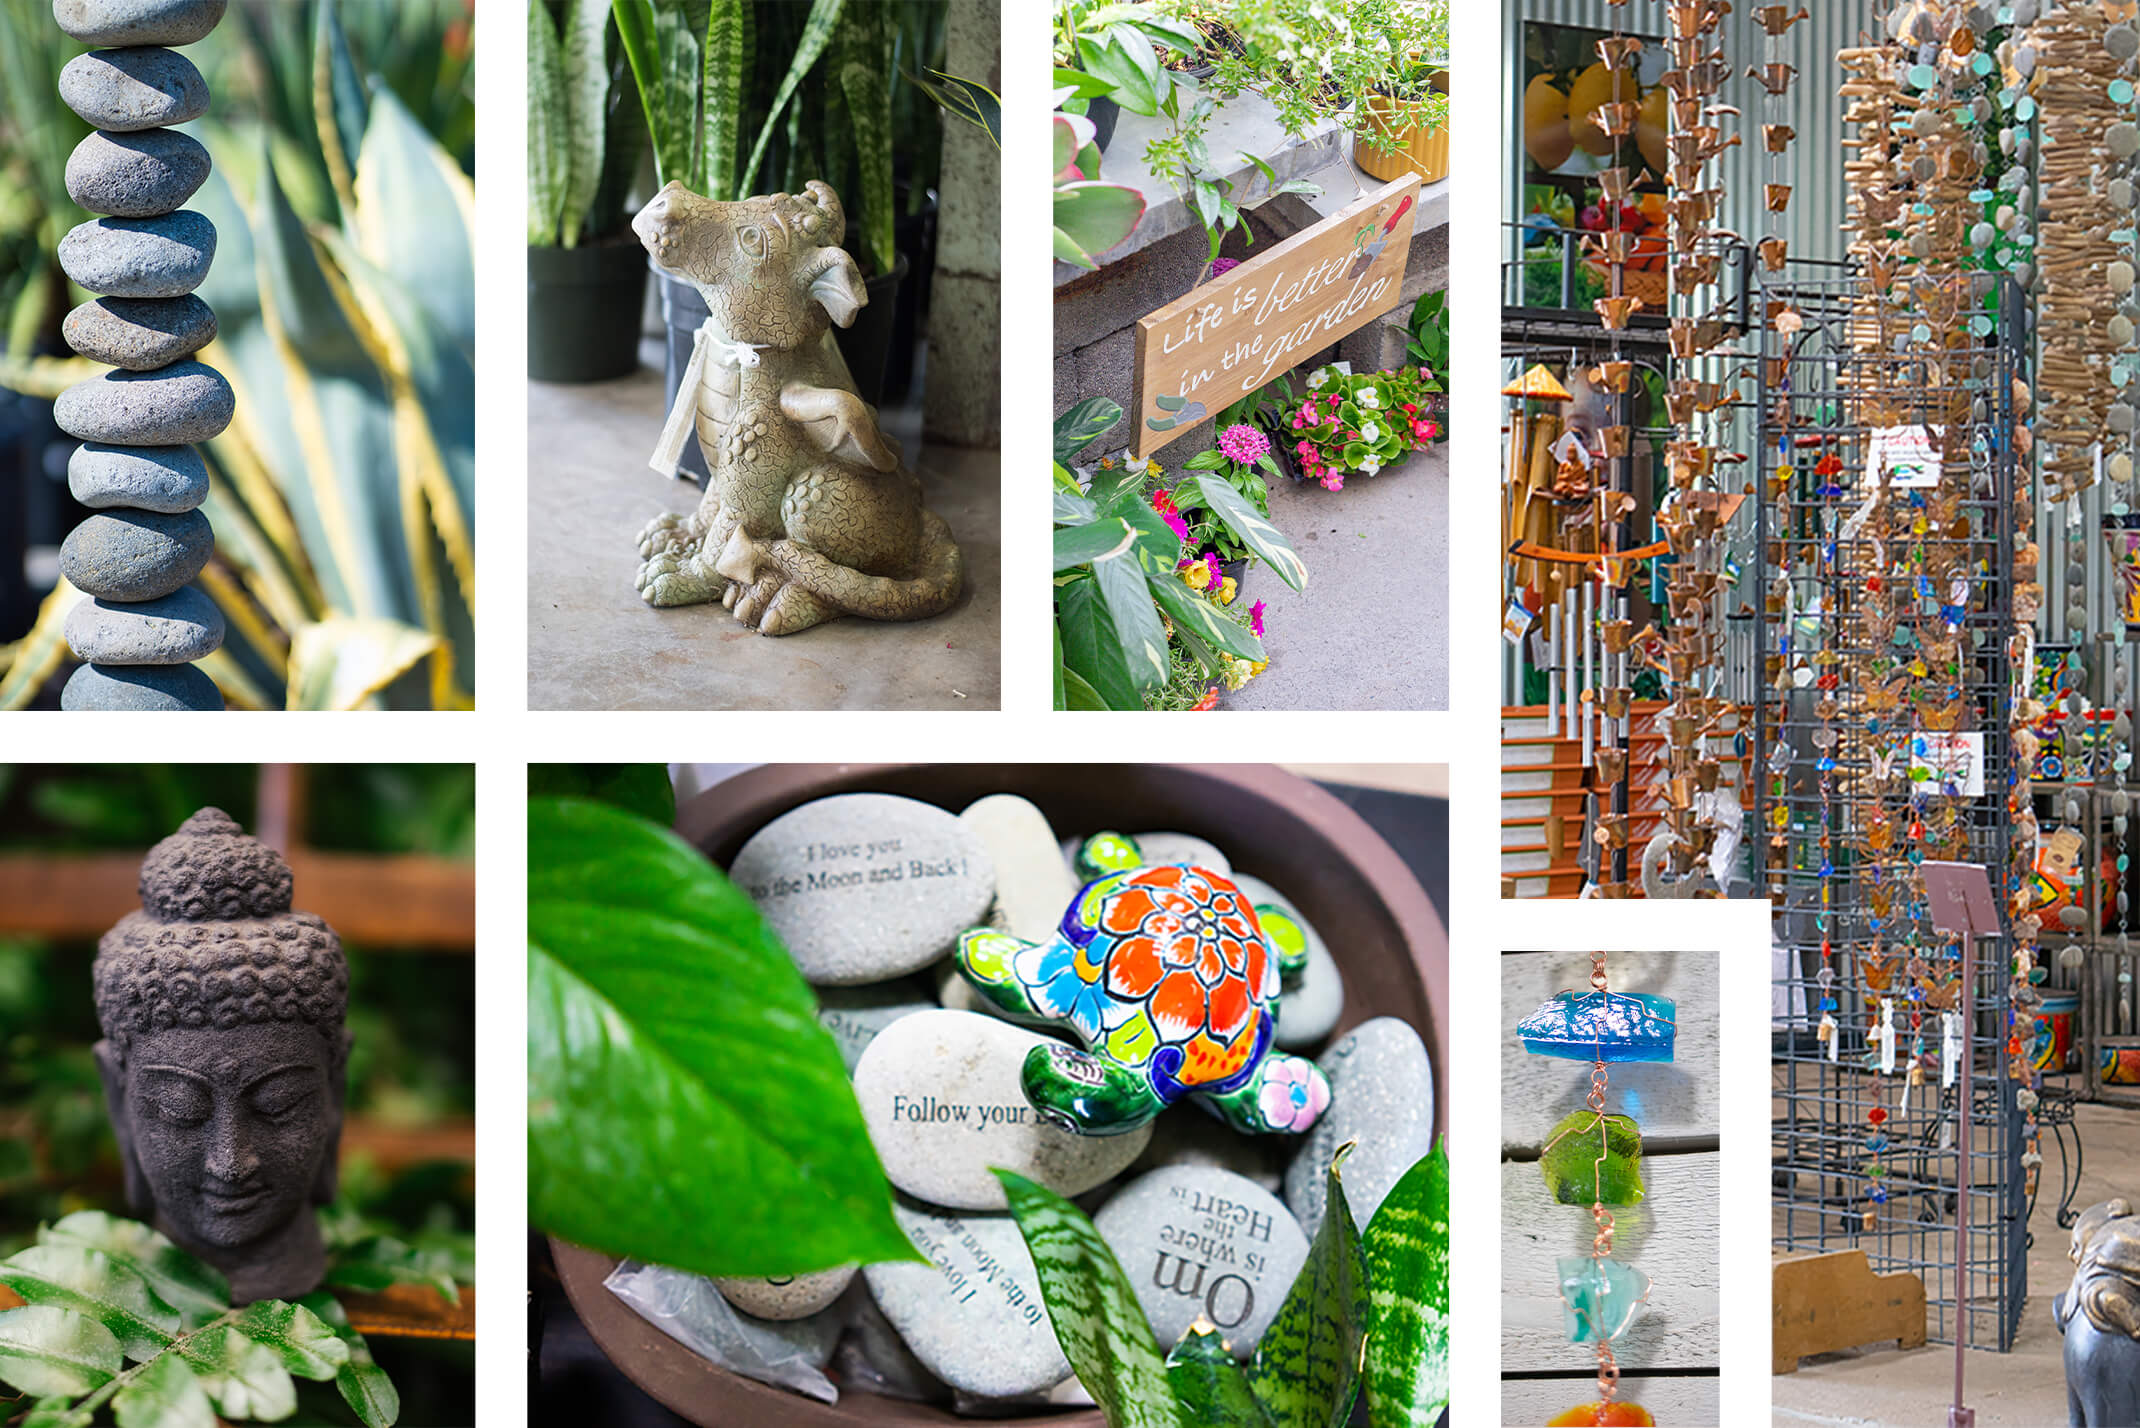 A collage of 7 images: a stacked stone sculpture with agaves in the background; a stone buddha head near a leaf and some wooden shelves; a bowl of stones with different sayings carved in them and a small talavera turtle on top - with some houseplant leaves in the foreground; a baby dragon sculpture near some houseplants; a closeup of a colorful shattered glass decorative rain chain; and a wide variety of rain chains and windchimes hanging up on display at the store